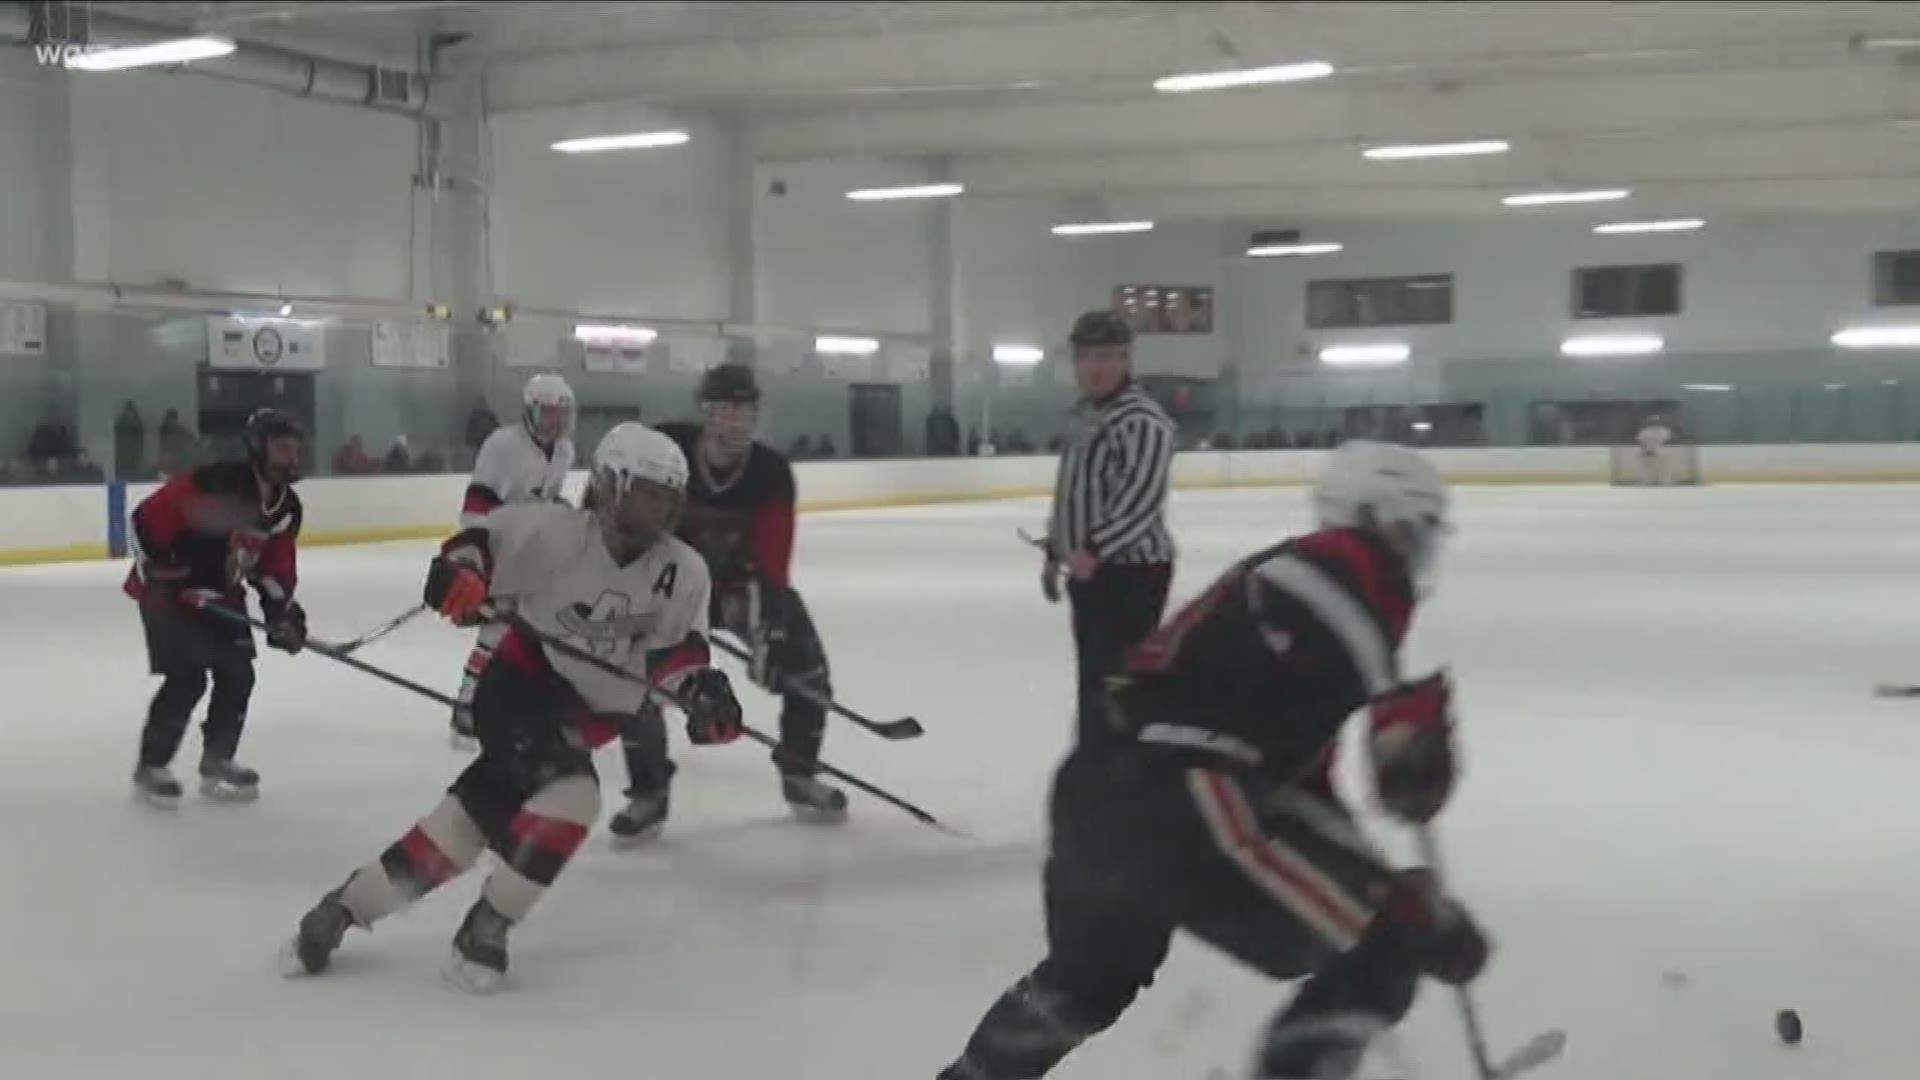 The NYS Amateur Hockey Association regional president resigned after the video surfaced.